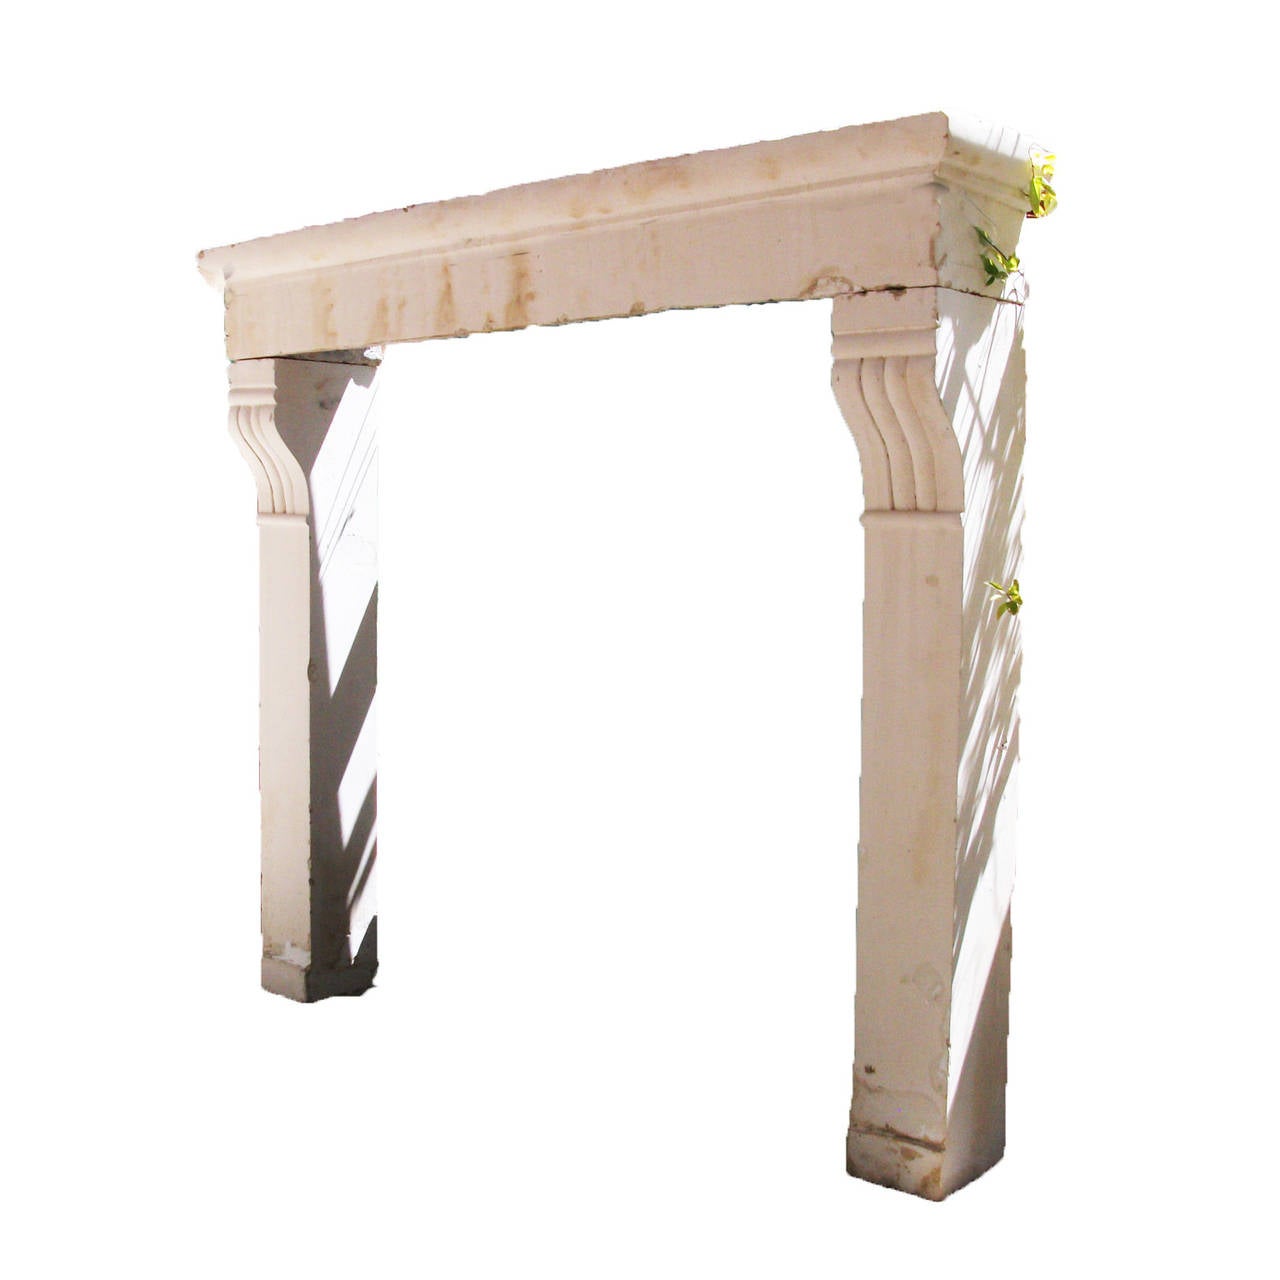 Antique French Limestone fireplace. This countryside style fireplace is handcrafted in limestone. This limestone fireplace is in good condition and from the 19th century. Very traditional style mantel with carved curved accents at the top of the